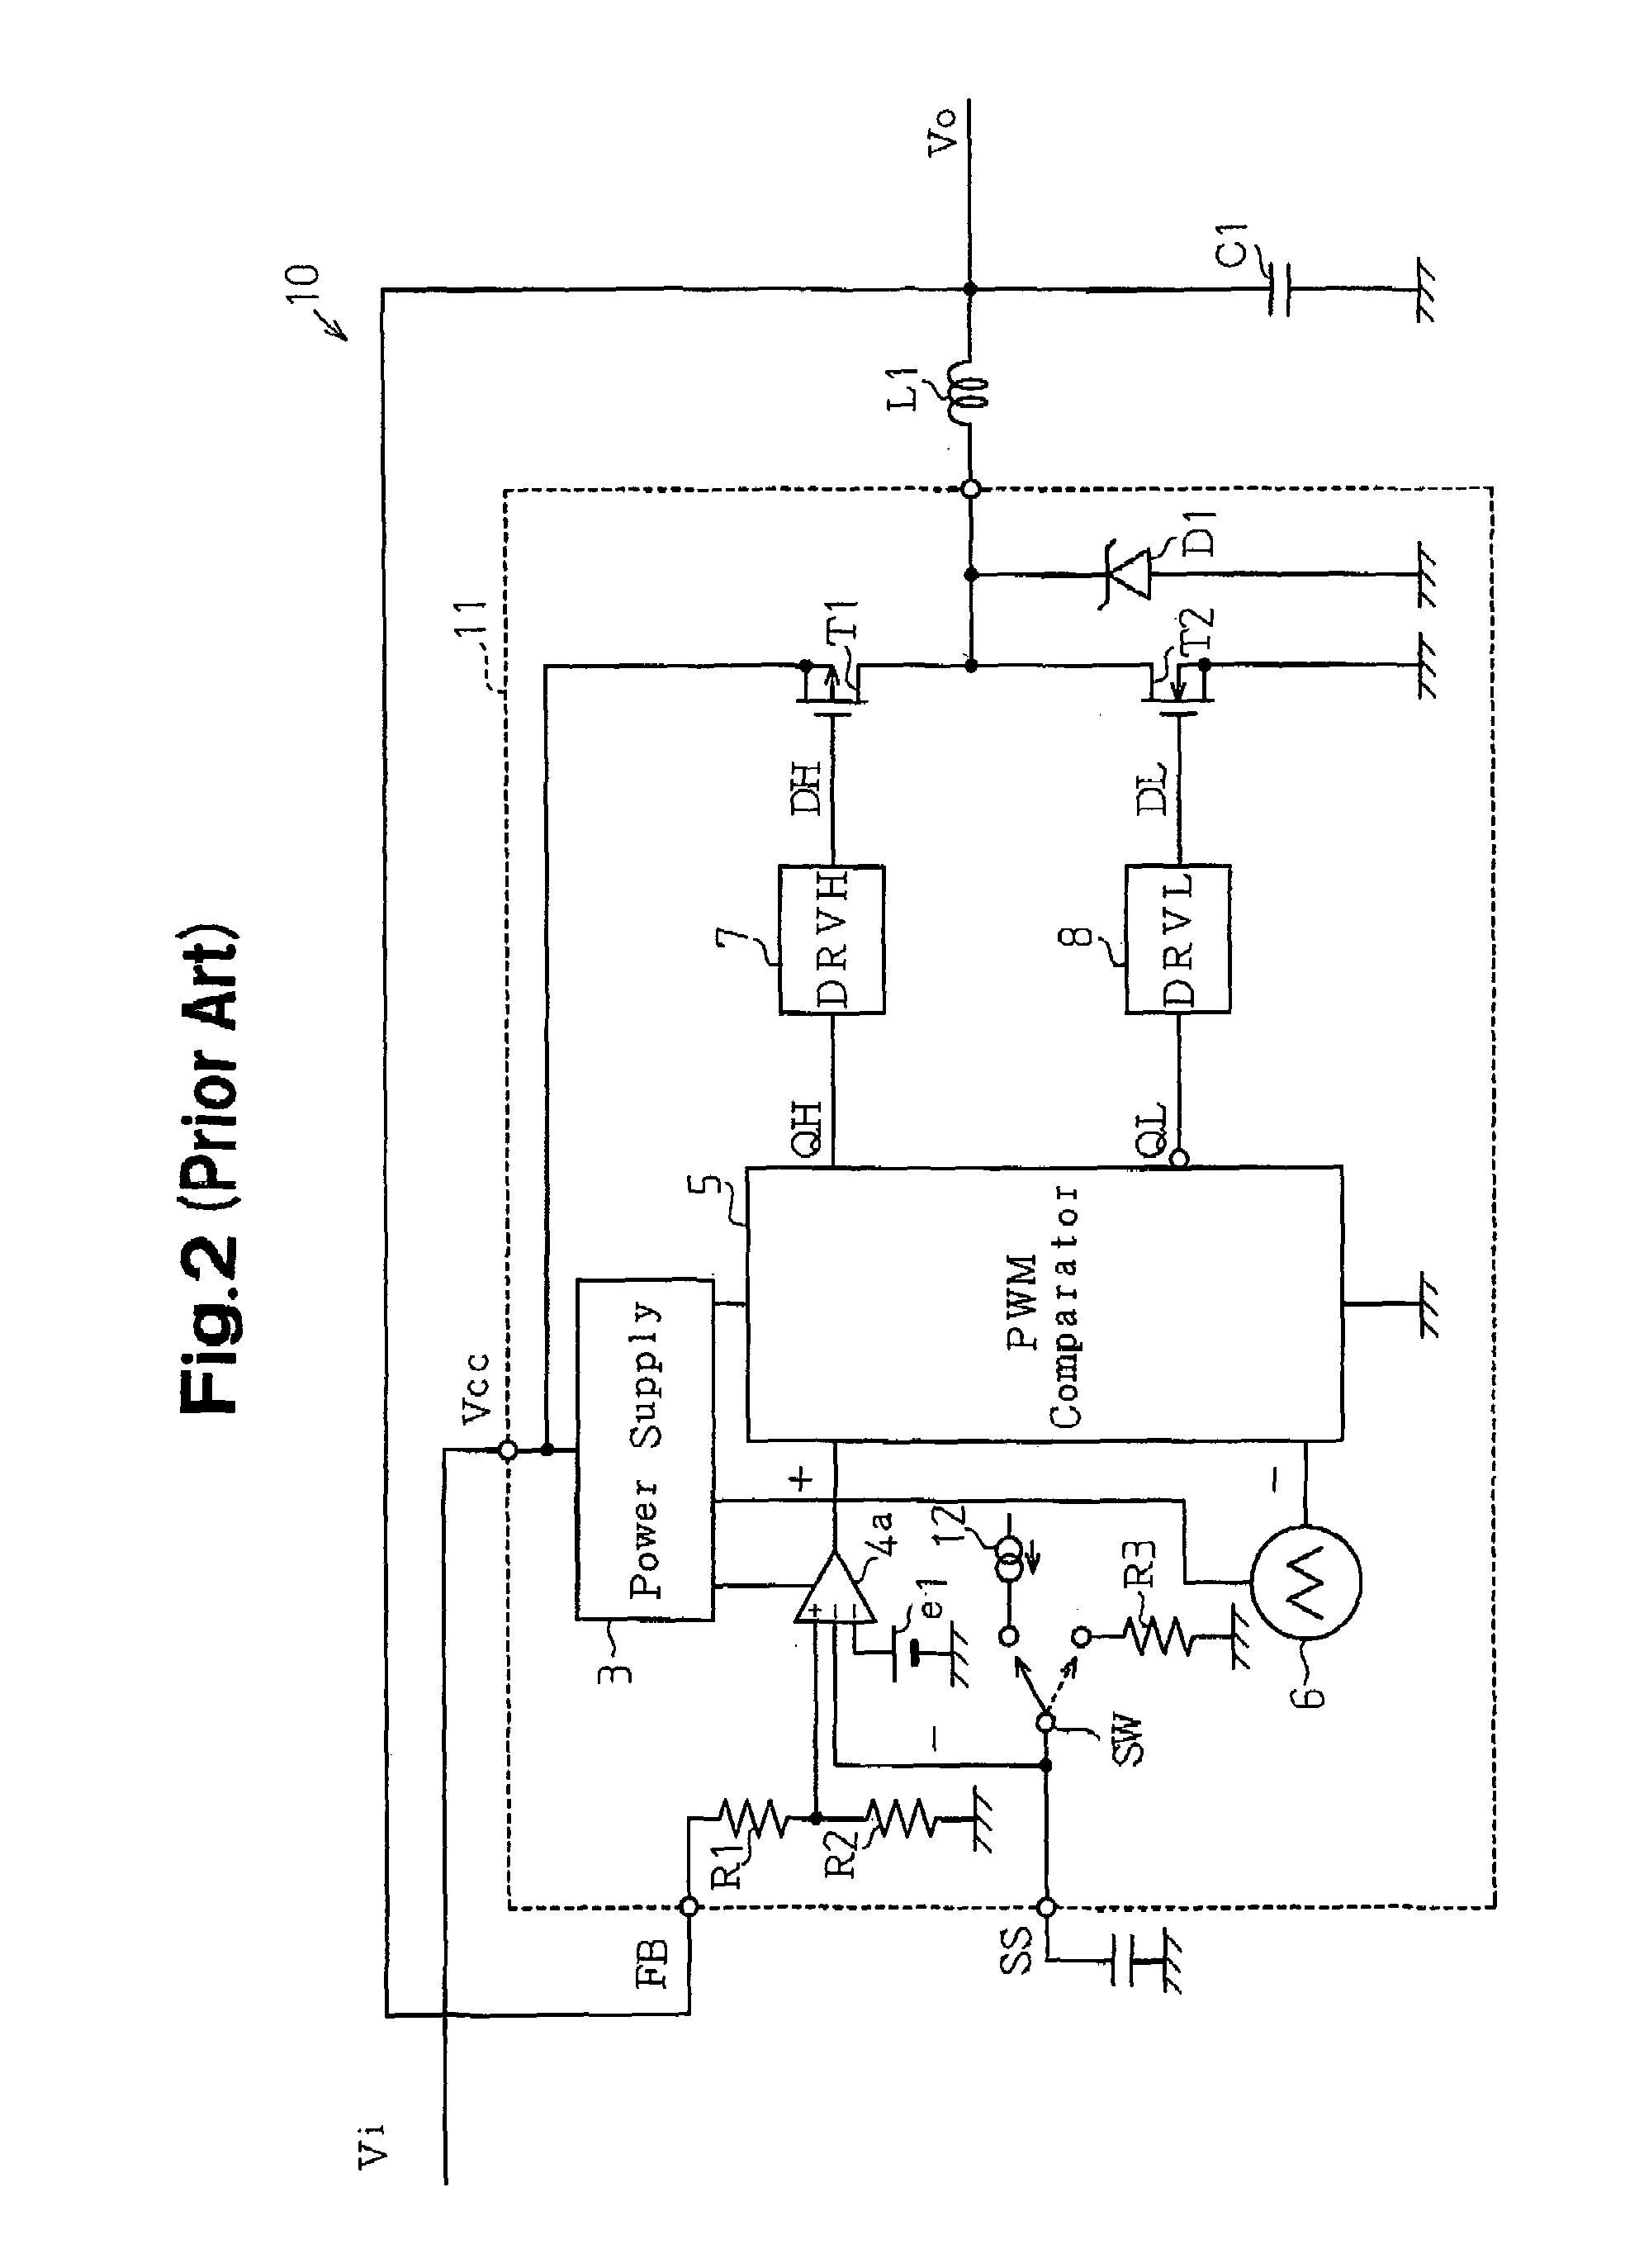 Circuit and method for controlling a DC-DC converter by enabling the synchronous rectifier during undervoltage lockout